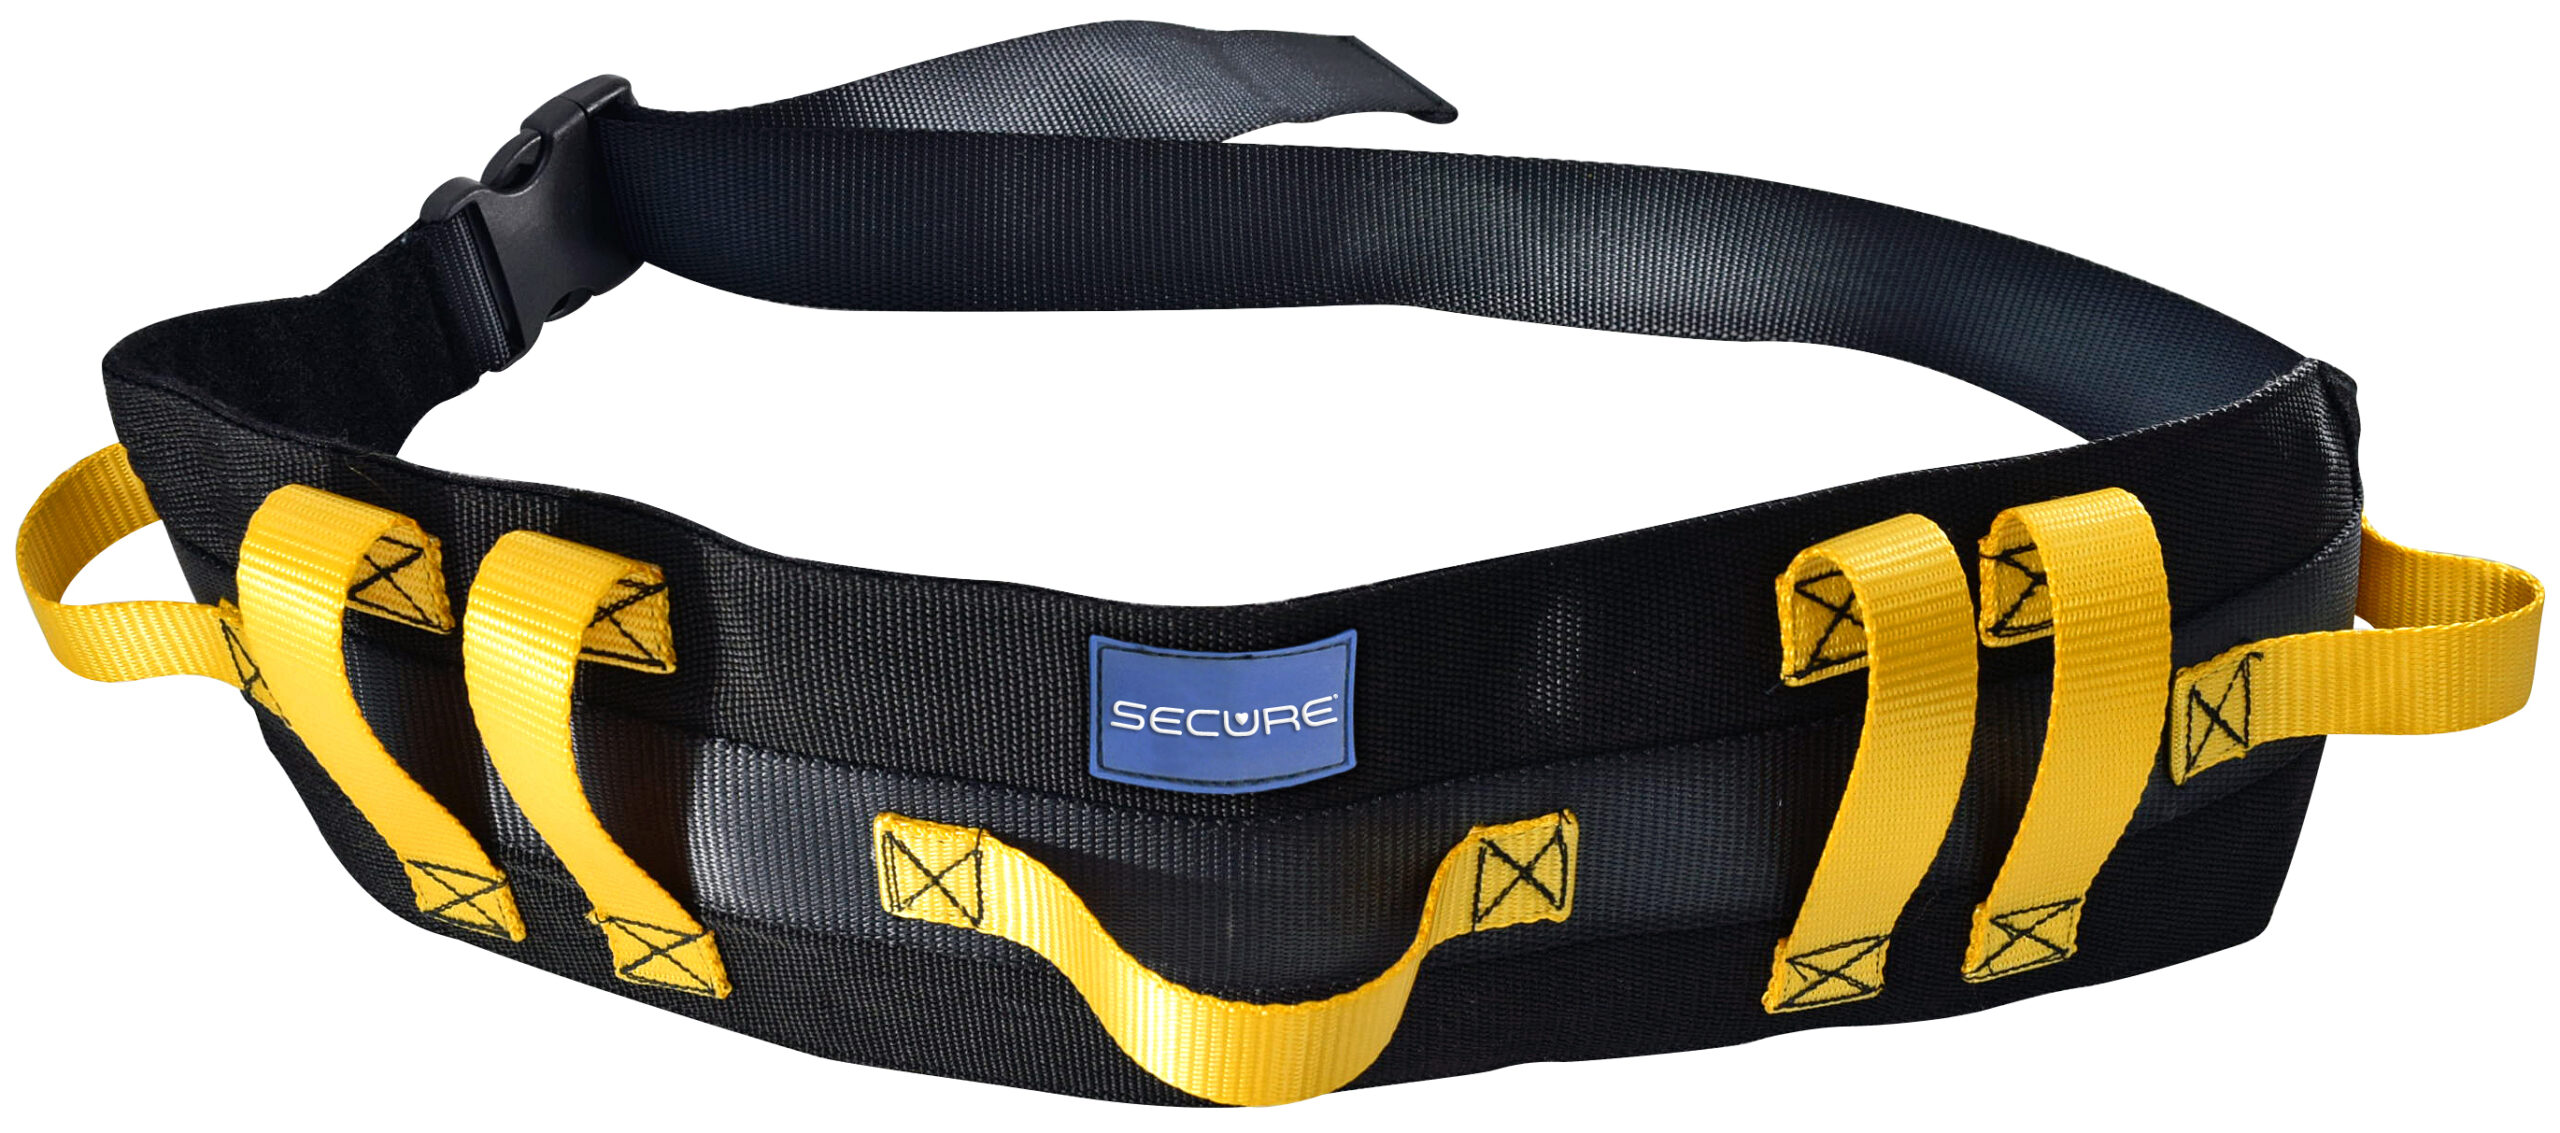 Secure bariatric gait belt for safe patient transfer and walking